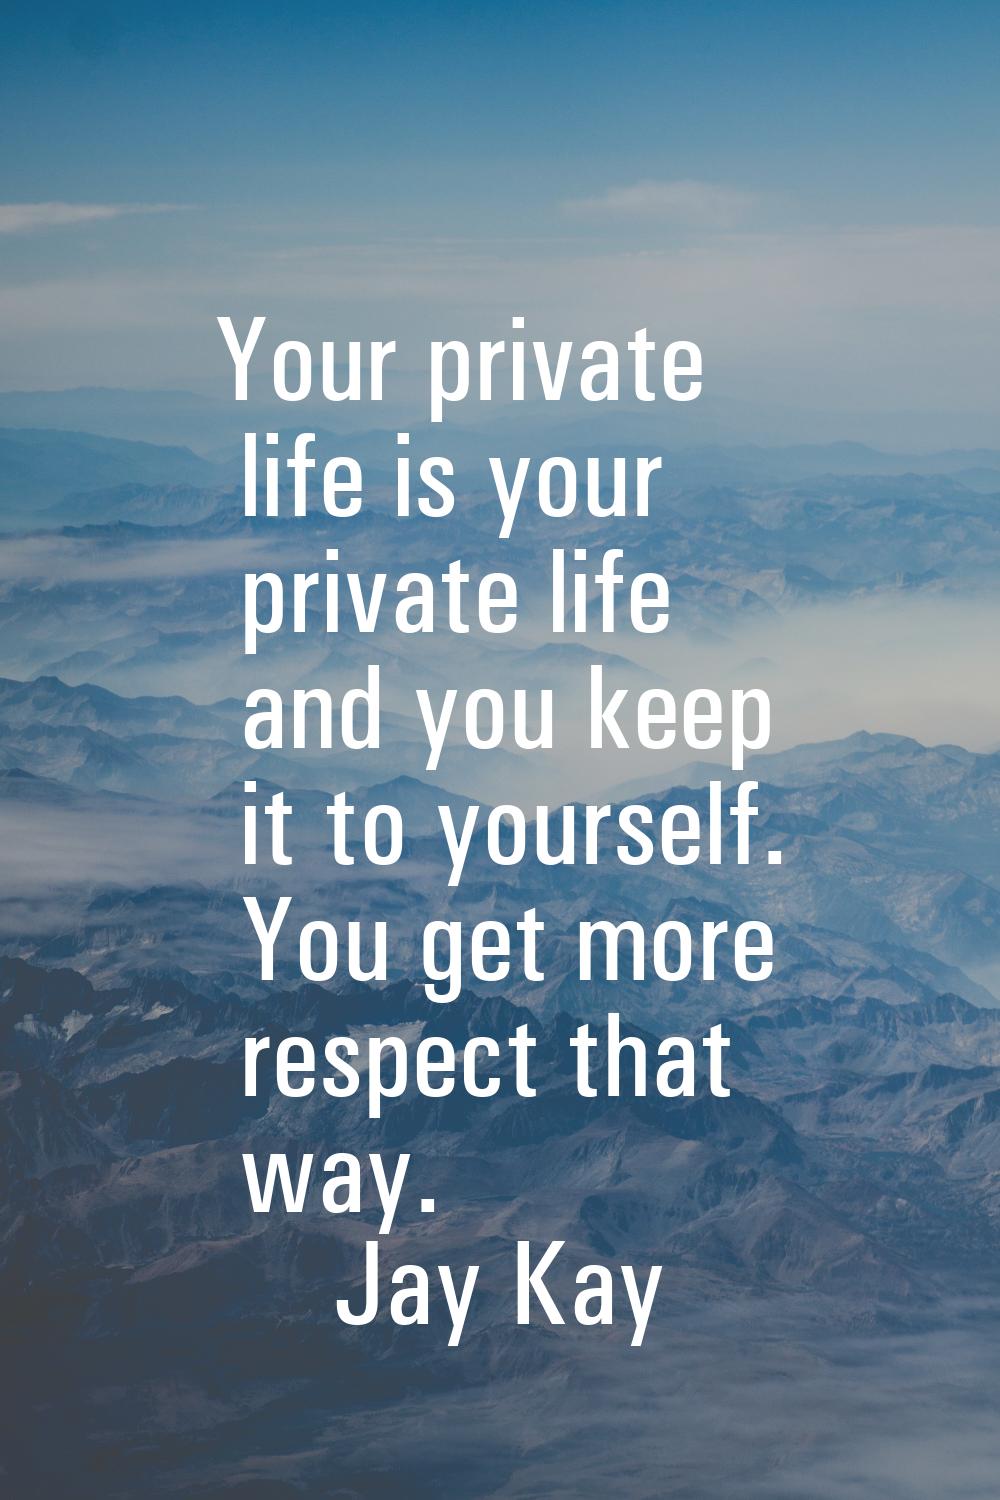 Your private life is your private life and you keep it to yourself. You get more respect that way.